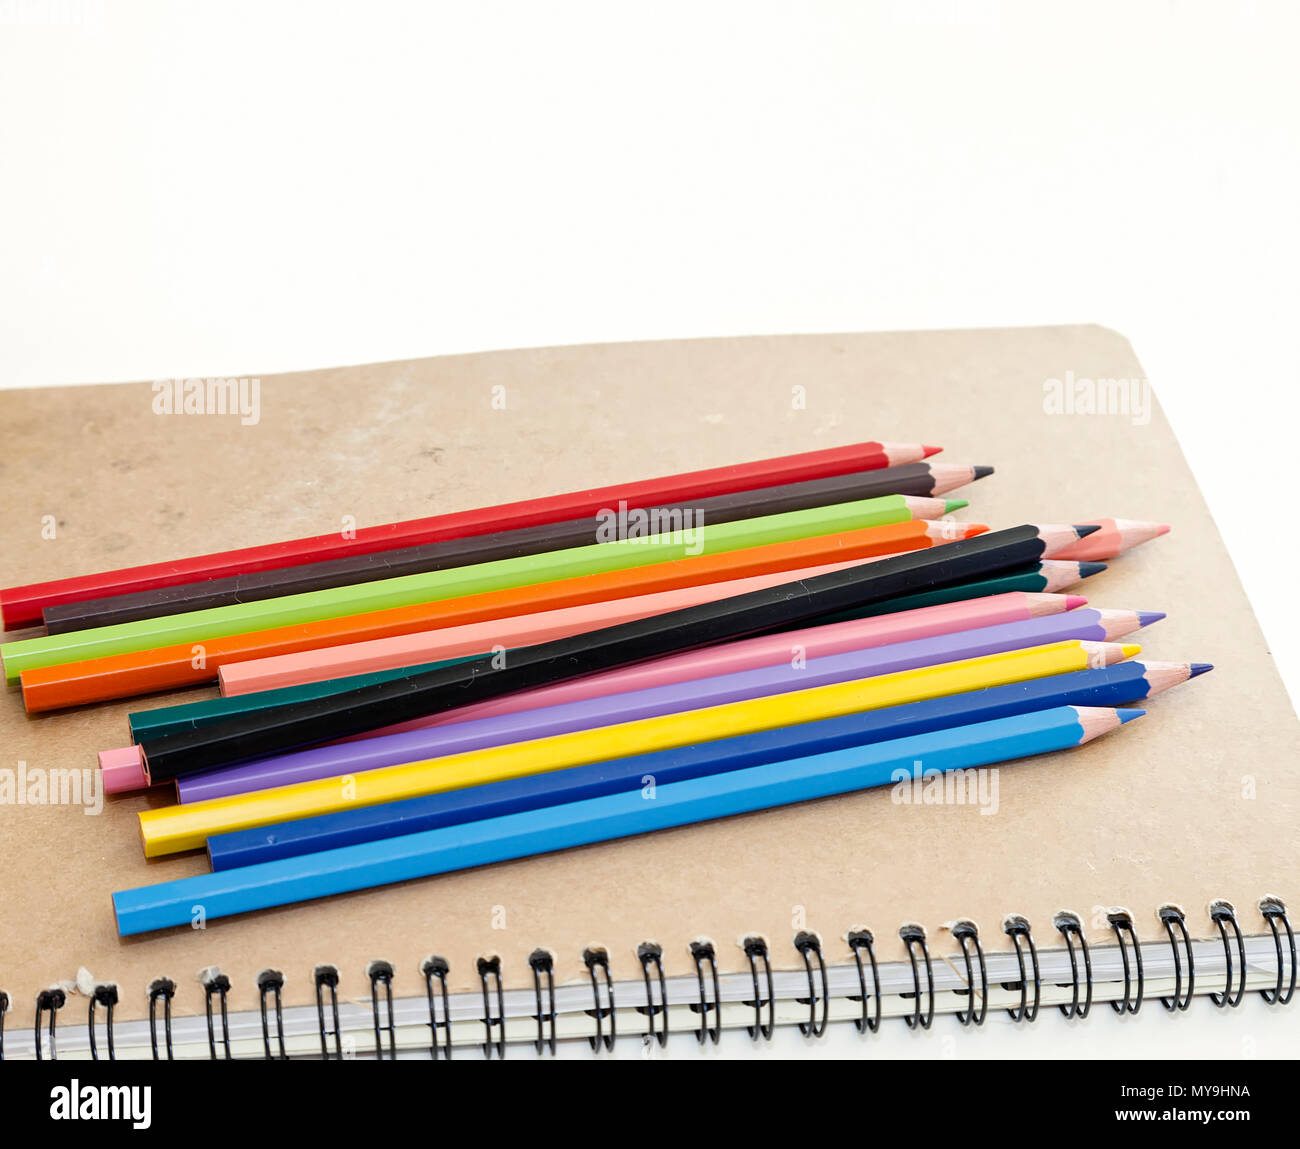 Colourful Pencils on a notebook . Isolated on a white background. Stock Image Stock Photo